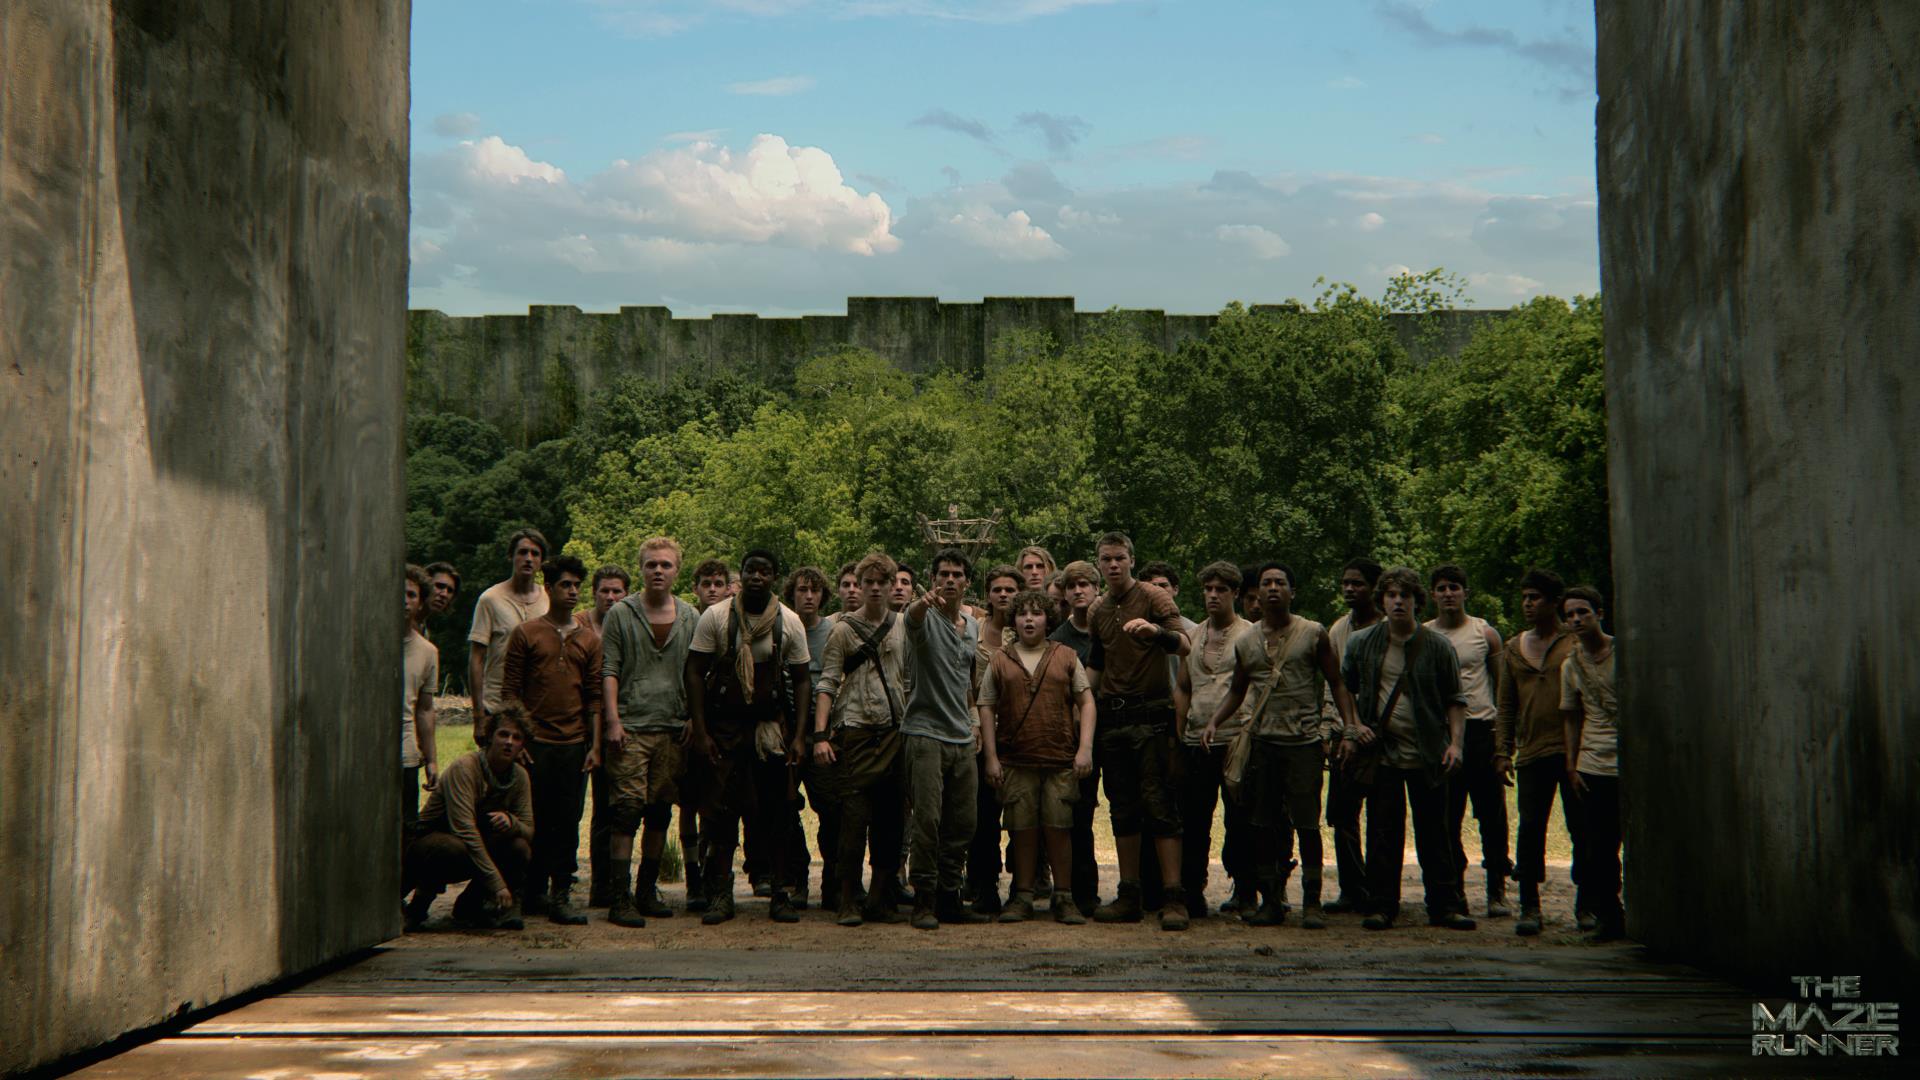 THE MAZE RUNNER: 3 ½ STARS. “look forward to The Maze Runner 2: Electric  Boogaloo” « Richard Crouse